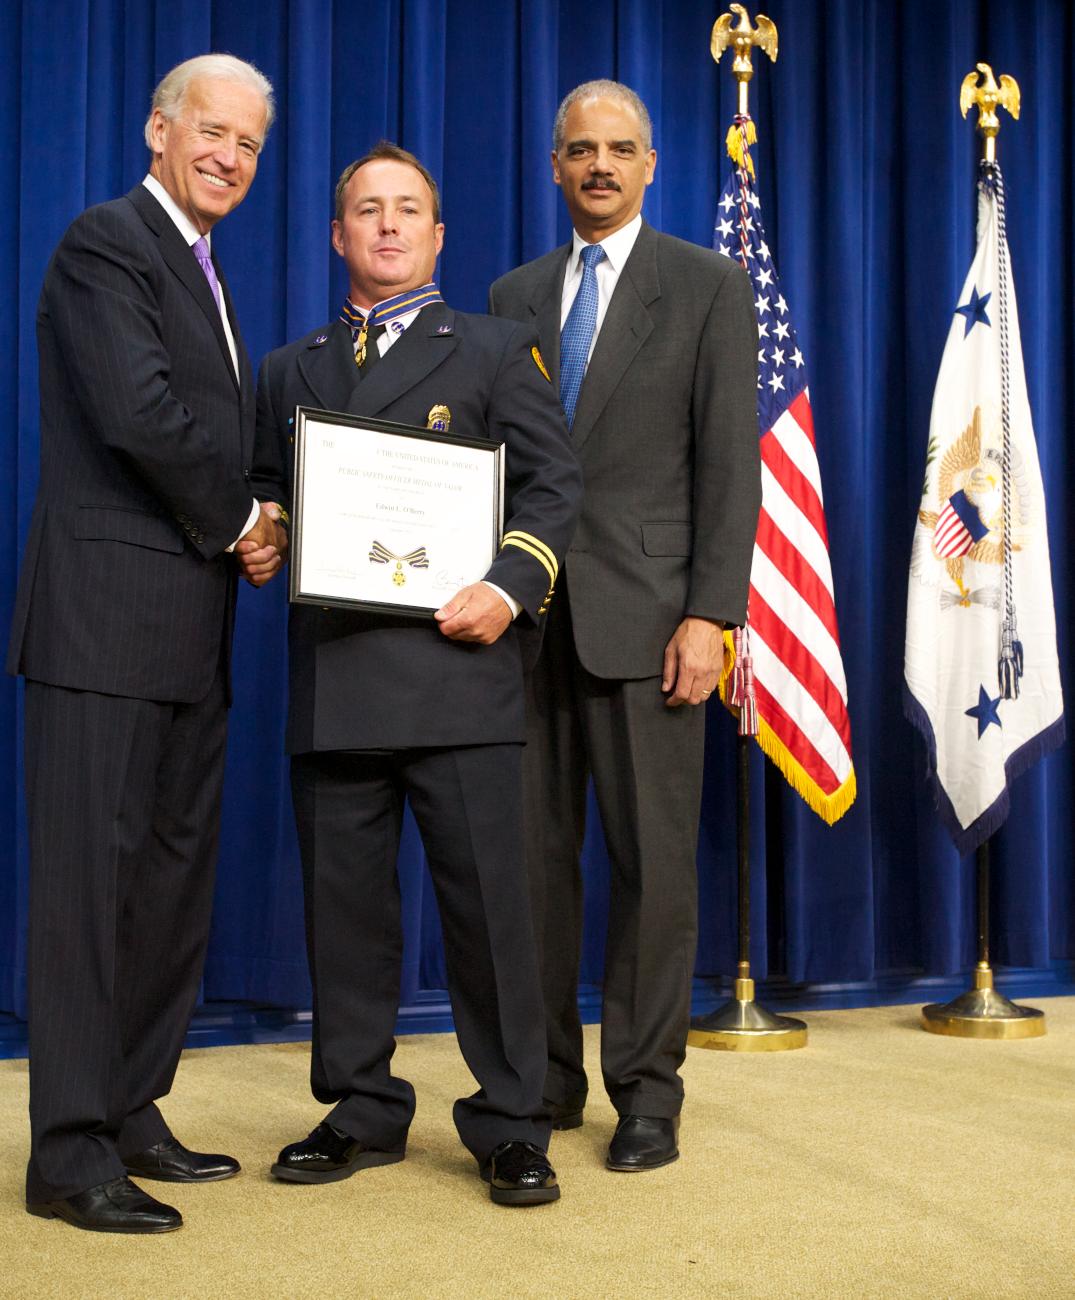 Three men standing in front of flags on a stage and facing the camera. The man in the middle is wearing an officer uniform and holding a Medal of Valor award plaque. 